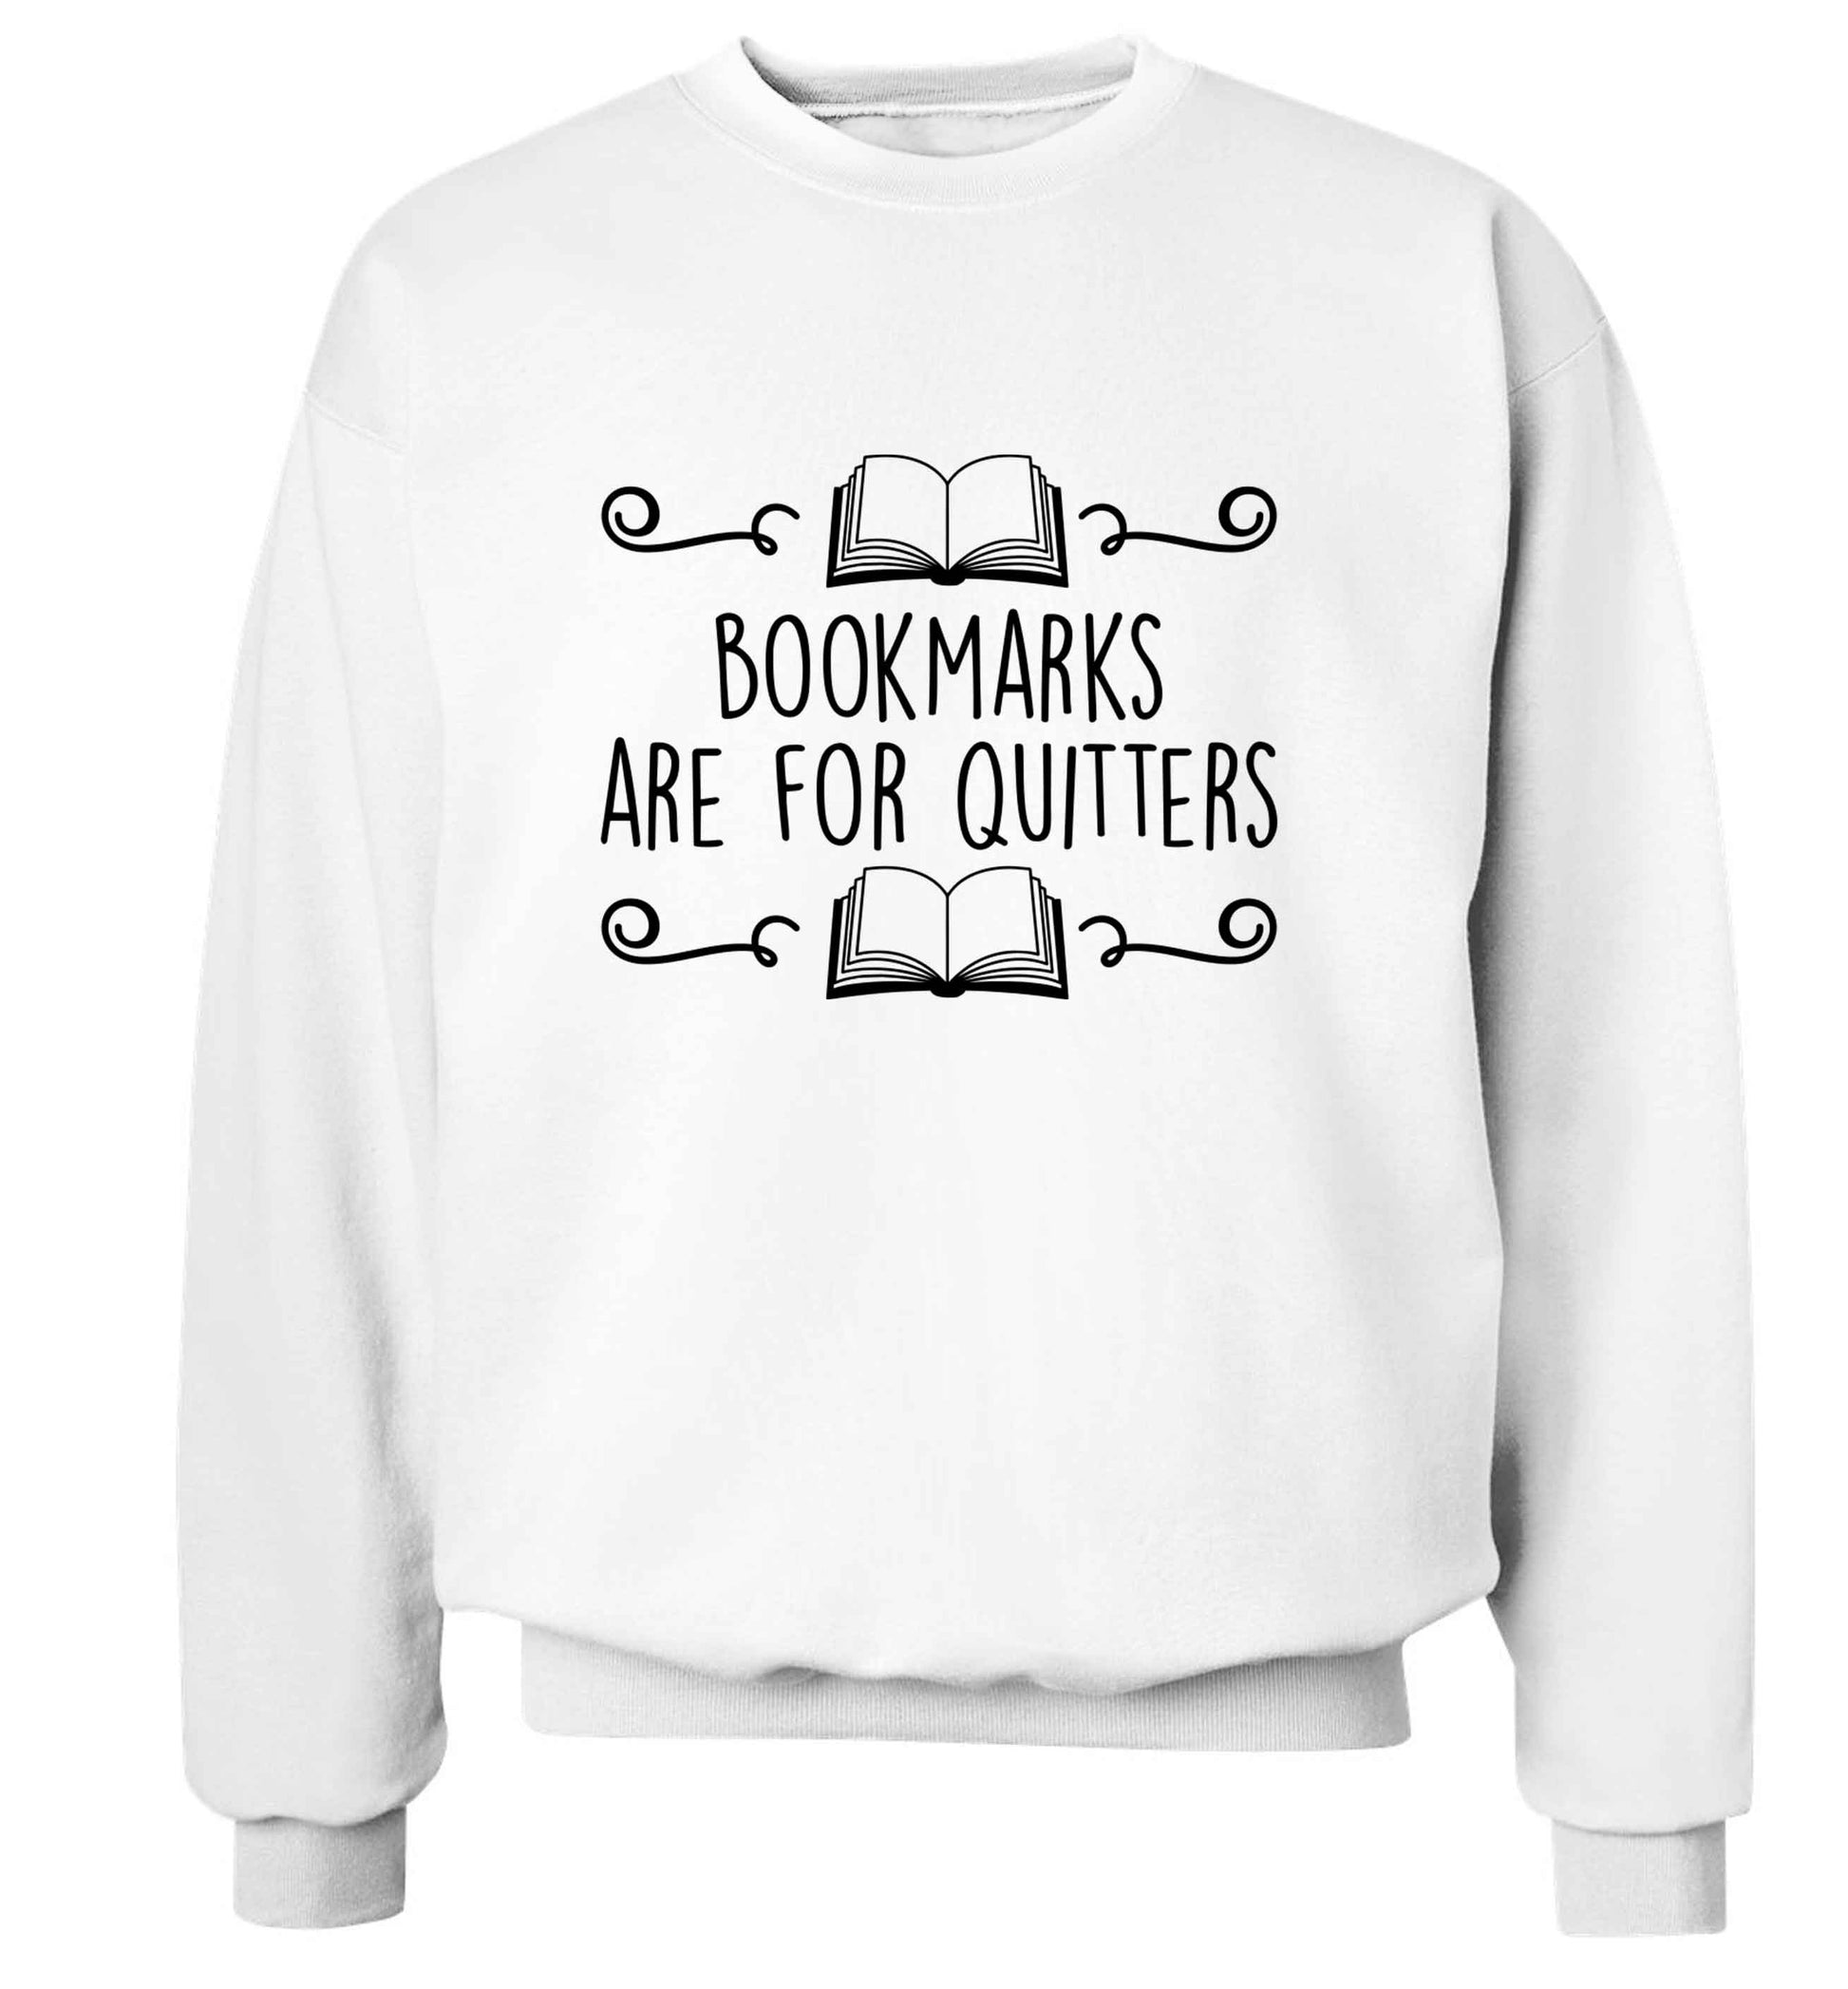 Bookmarks are for quitters adult's unisex white sweater 2XL